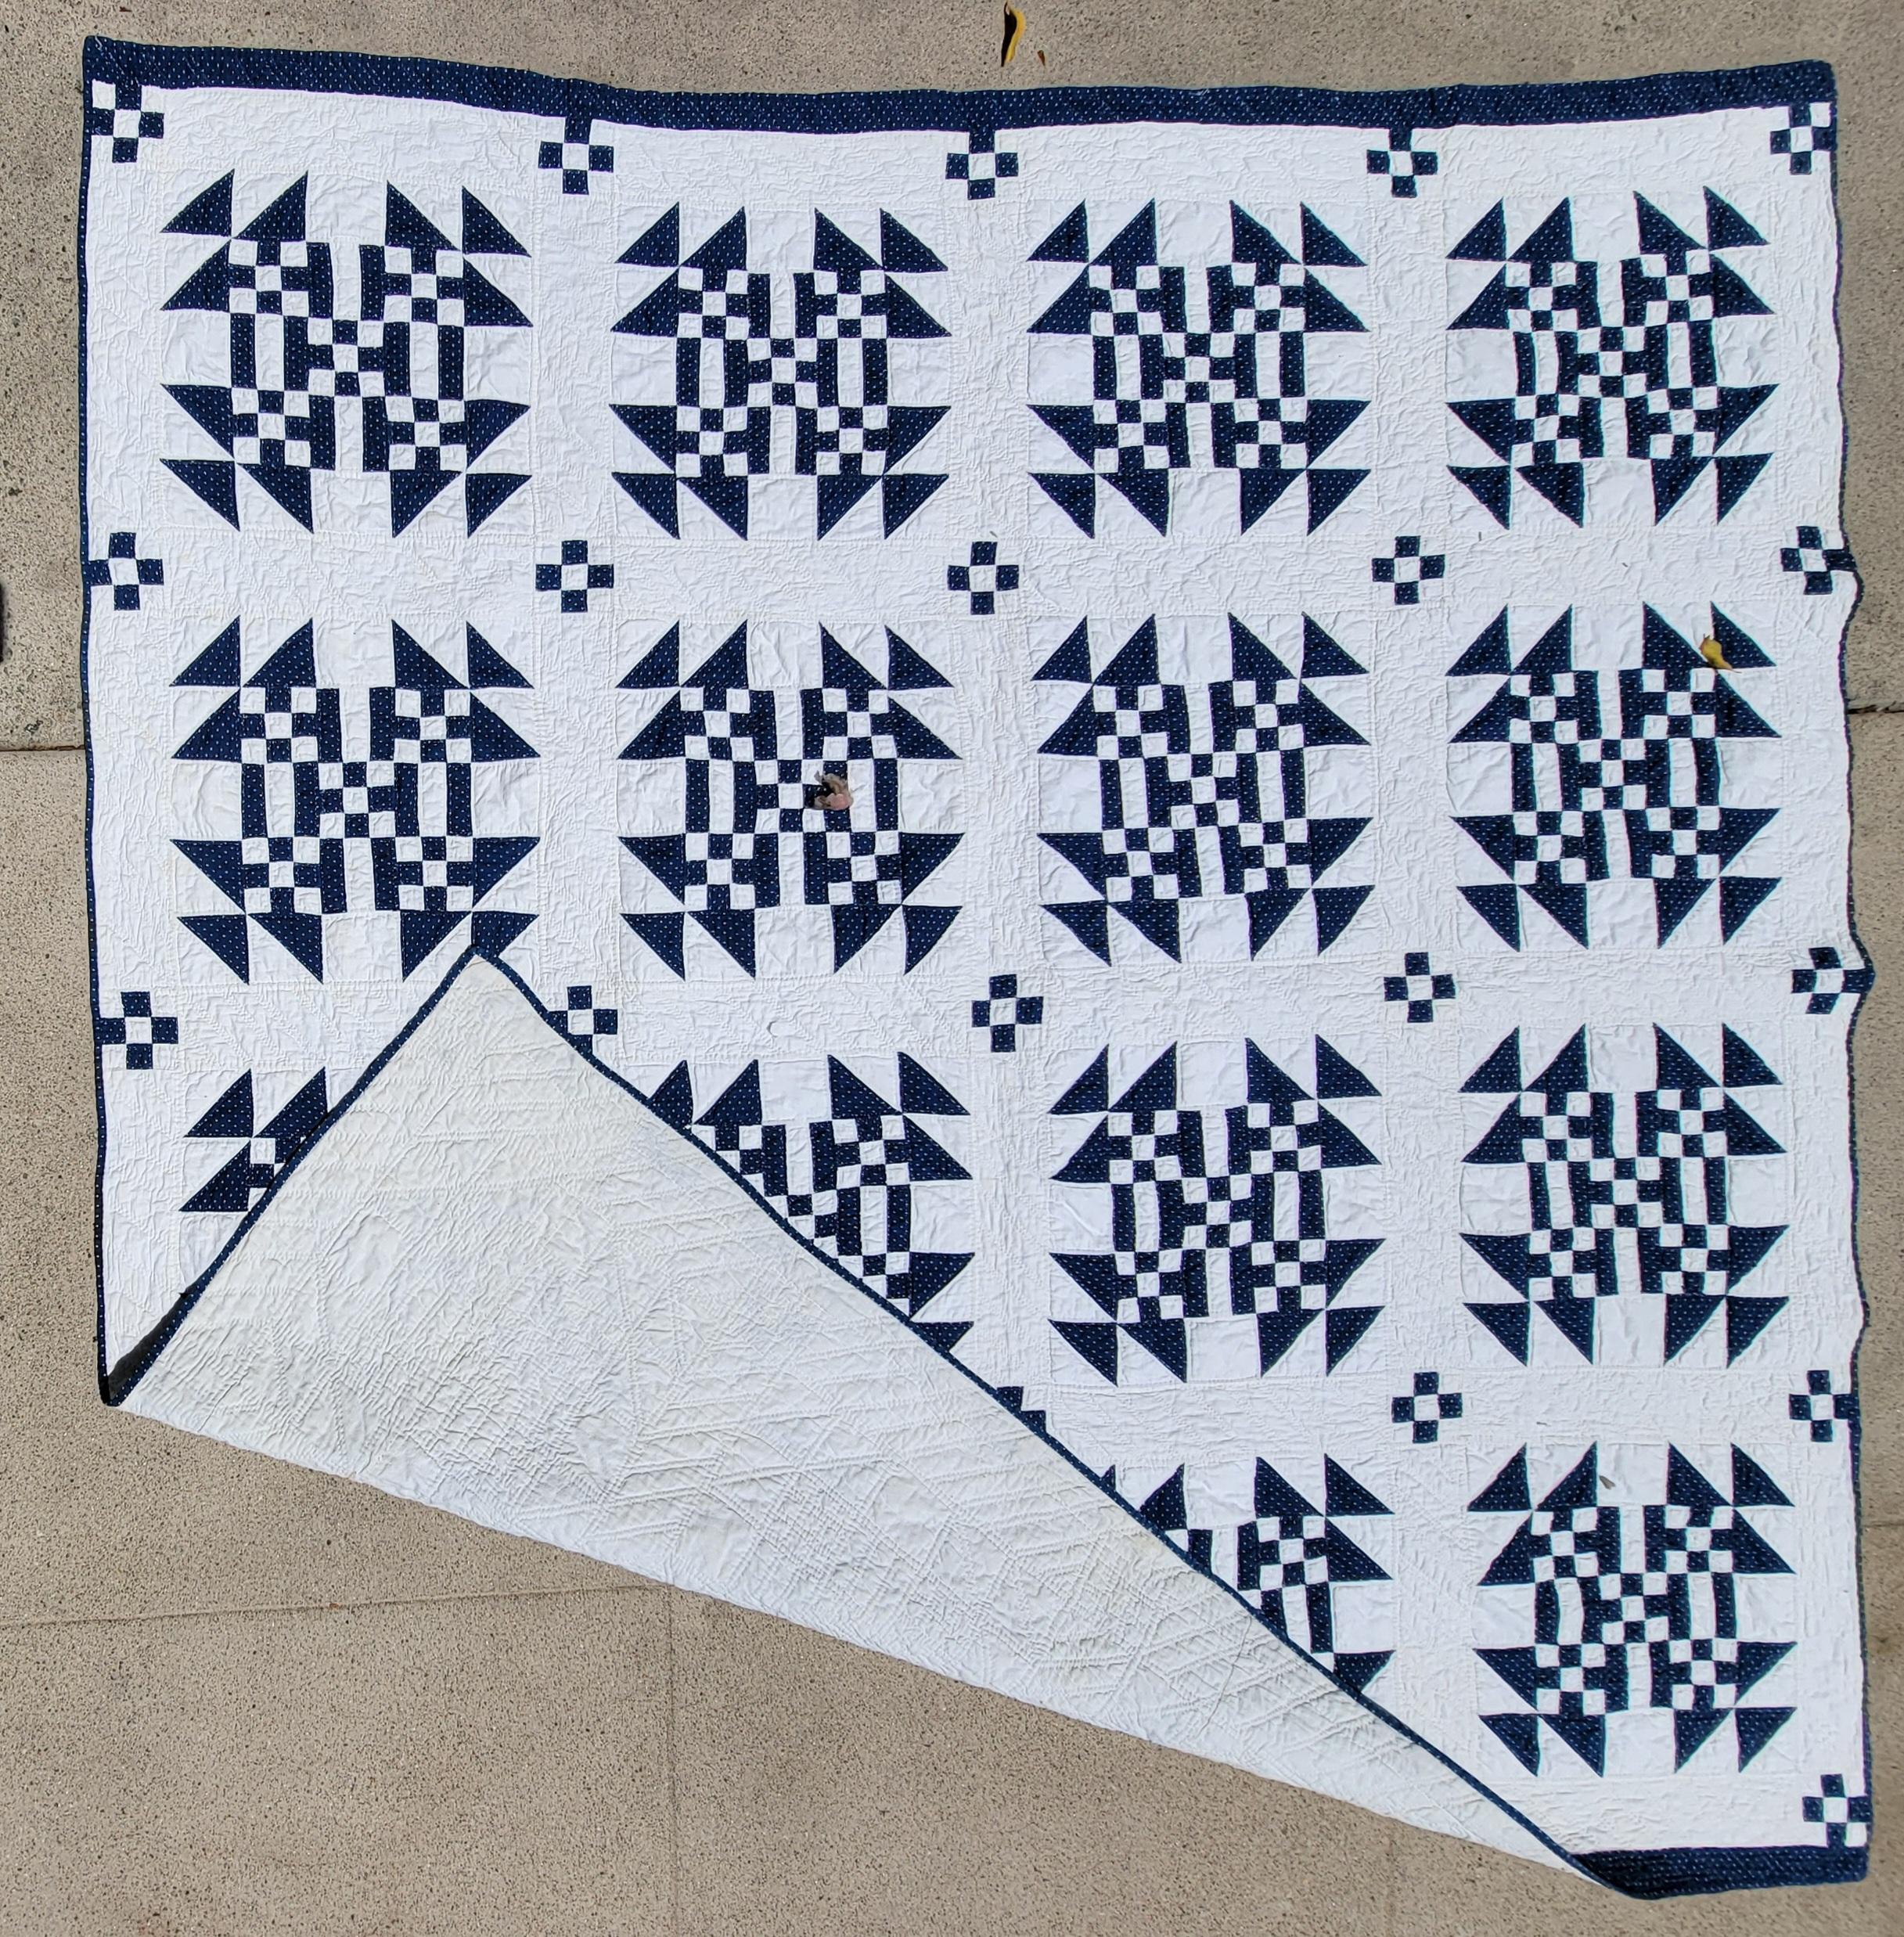 This 19thc early postage stamp quilt with a geometric pattern is pristine condition.This indigo & white quilt is so unusual and fantastic piecing.